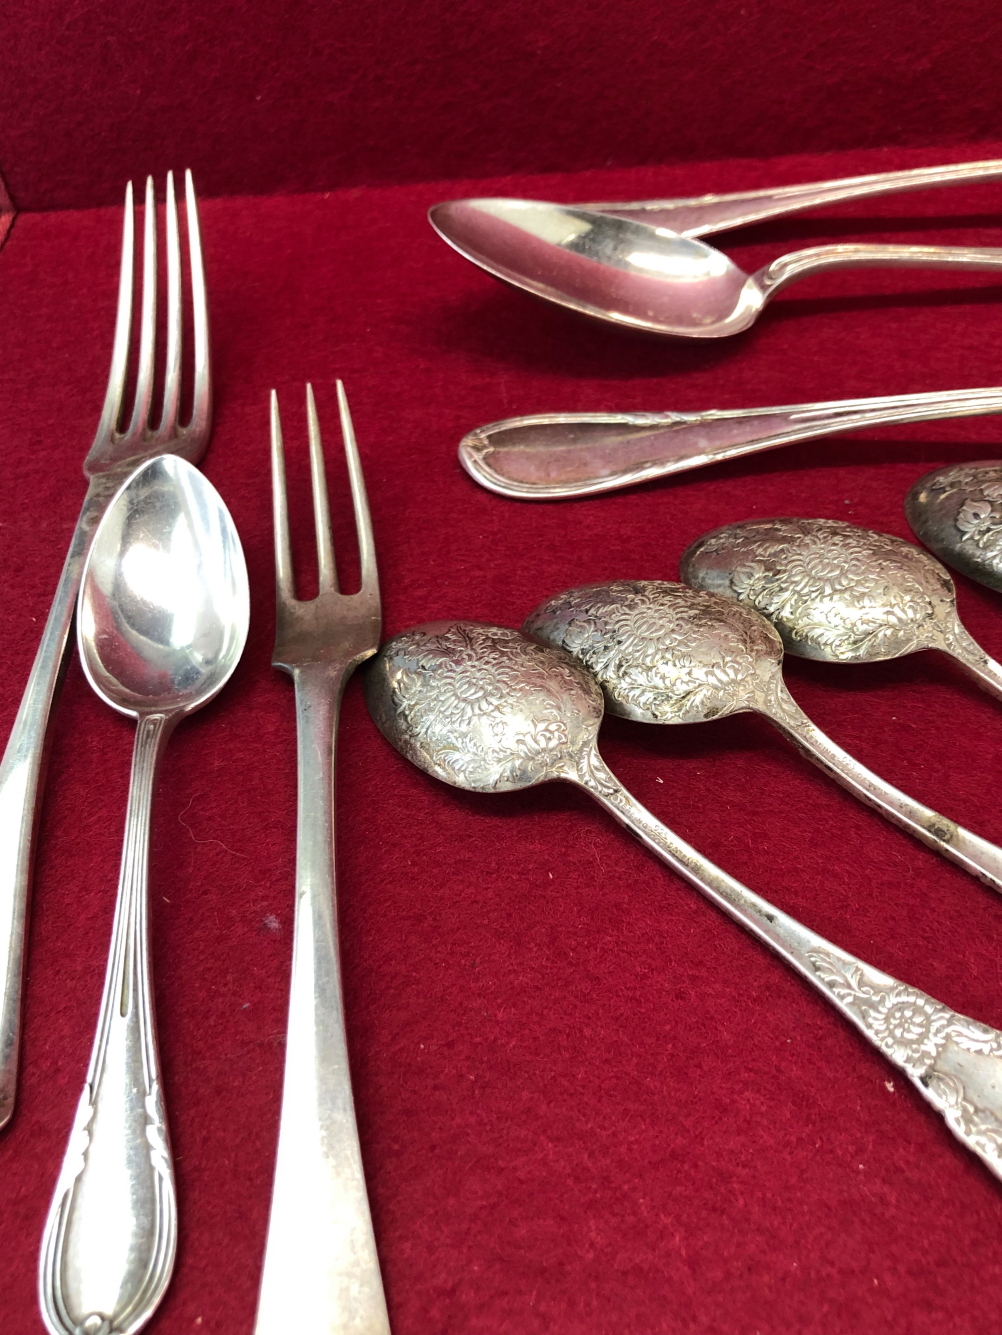 A STERLING SILVER FLORAL CAST PART CUTLERY SET, TWO EUROPEAN SILVER FORKS, 689Gms. TOGETHER WITH A - Image 4 of 5